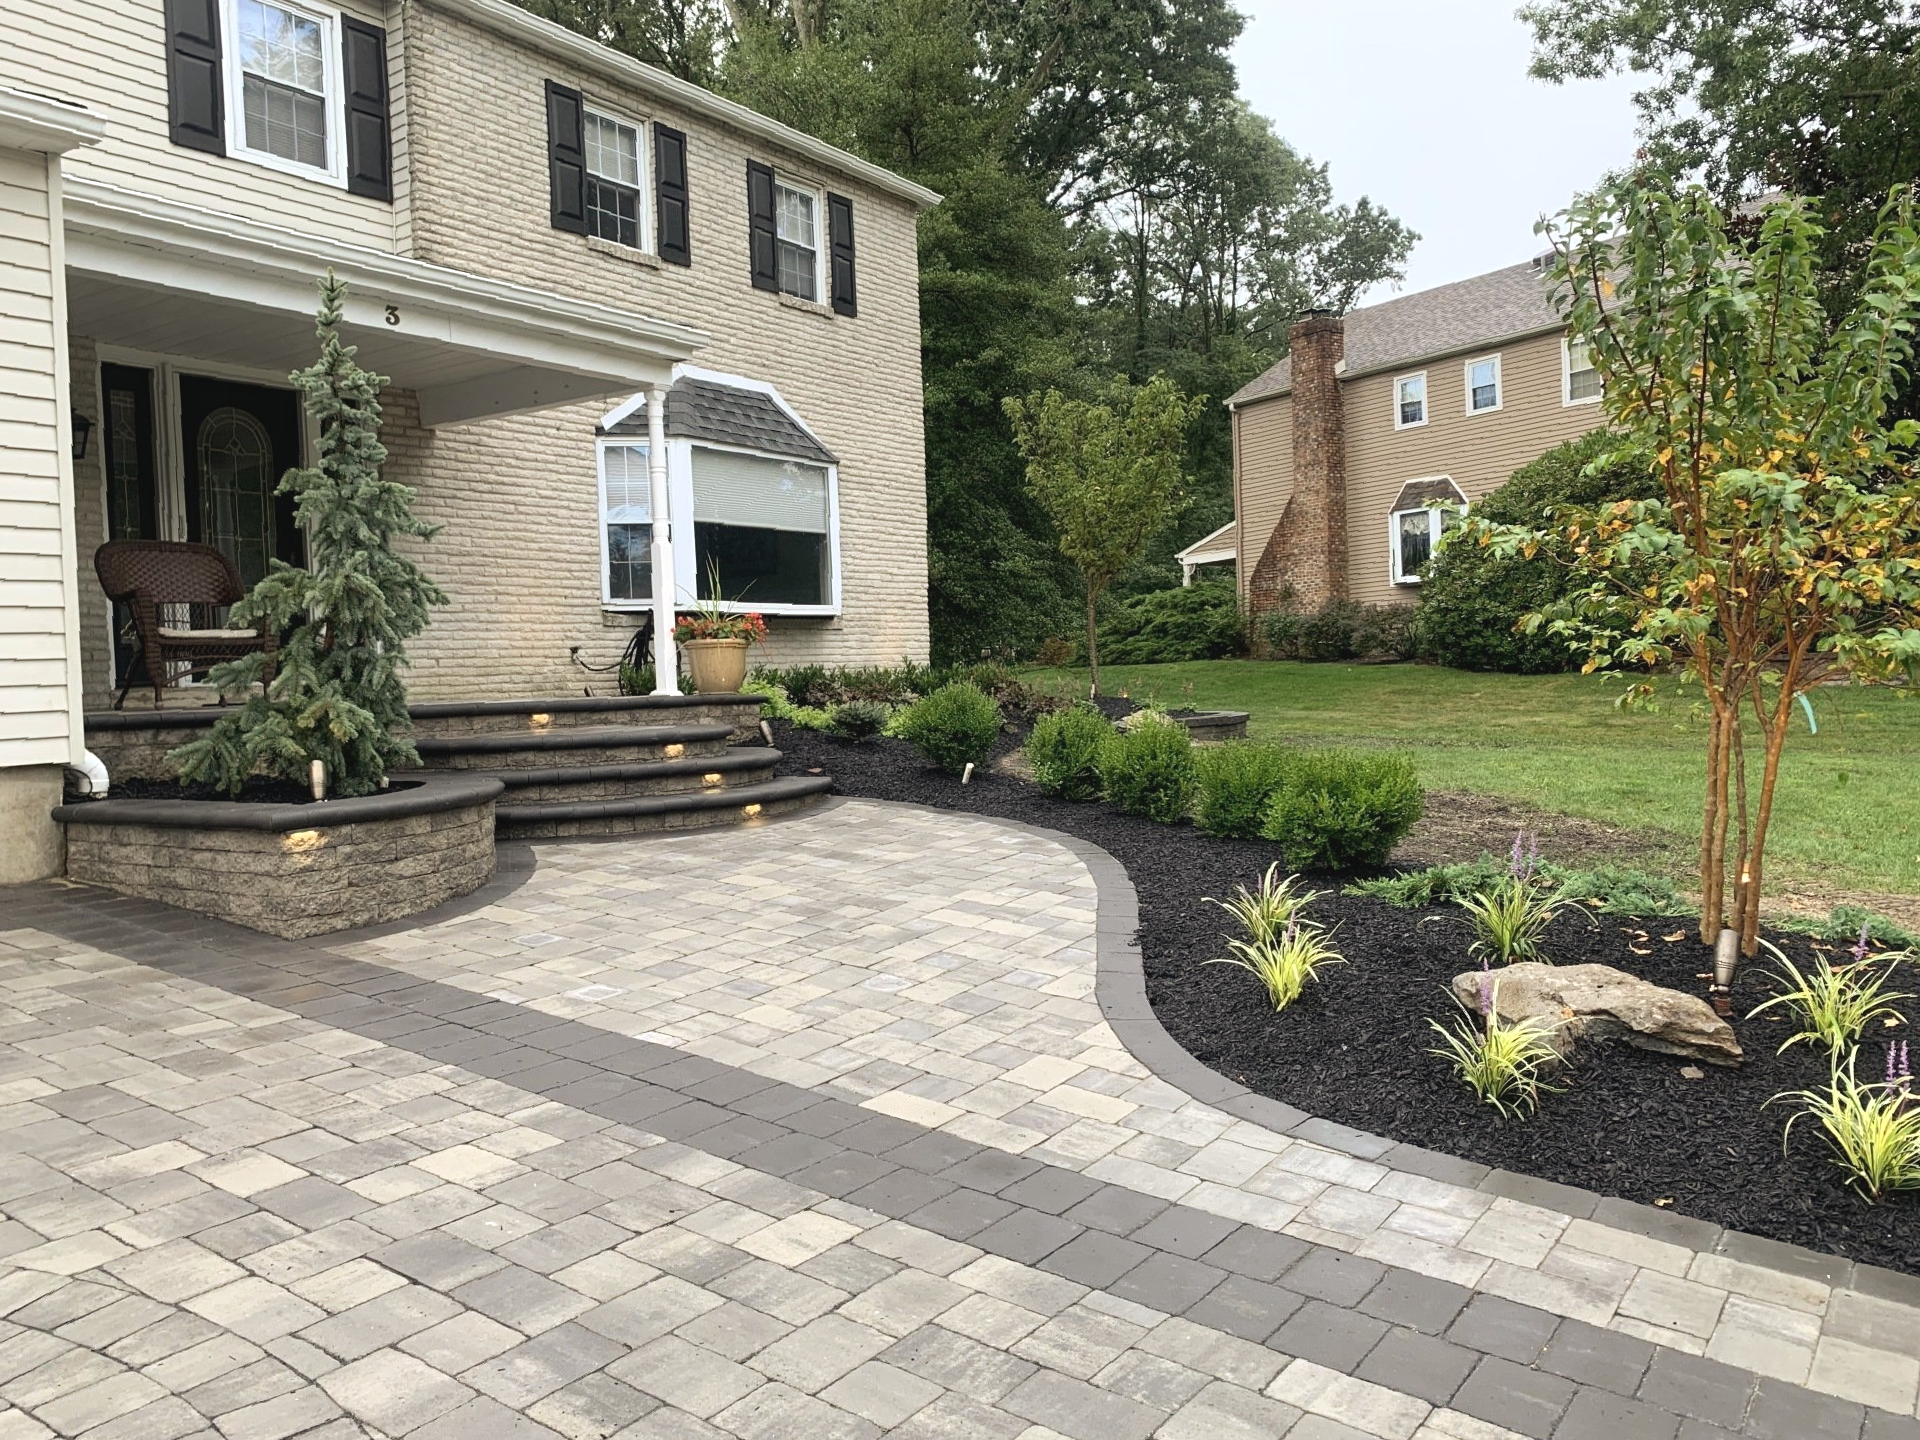 Cobblestone Retaining Wall In Landscaped Yard - Marlton, NJ - Outdoor Solutions Landscaping